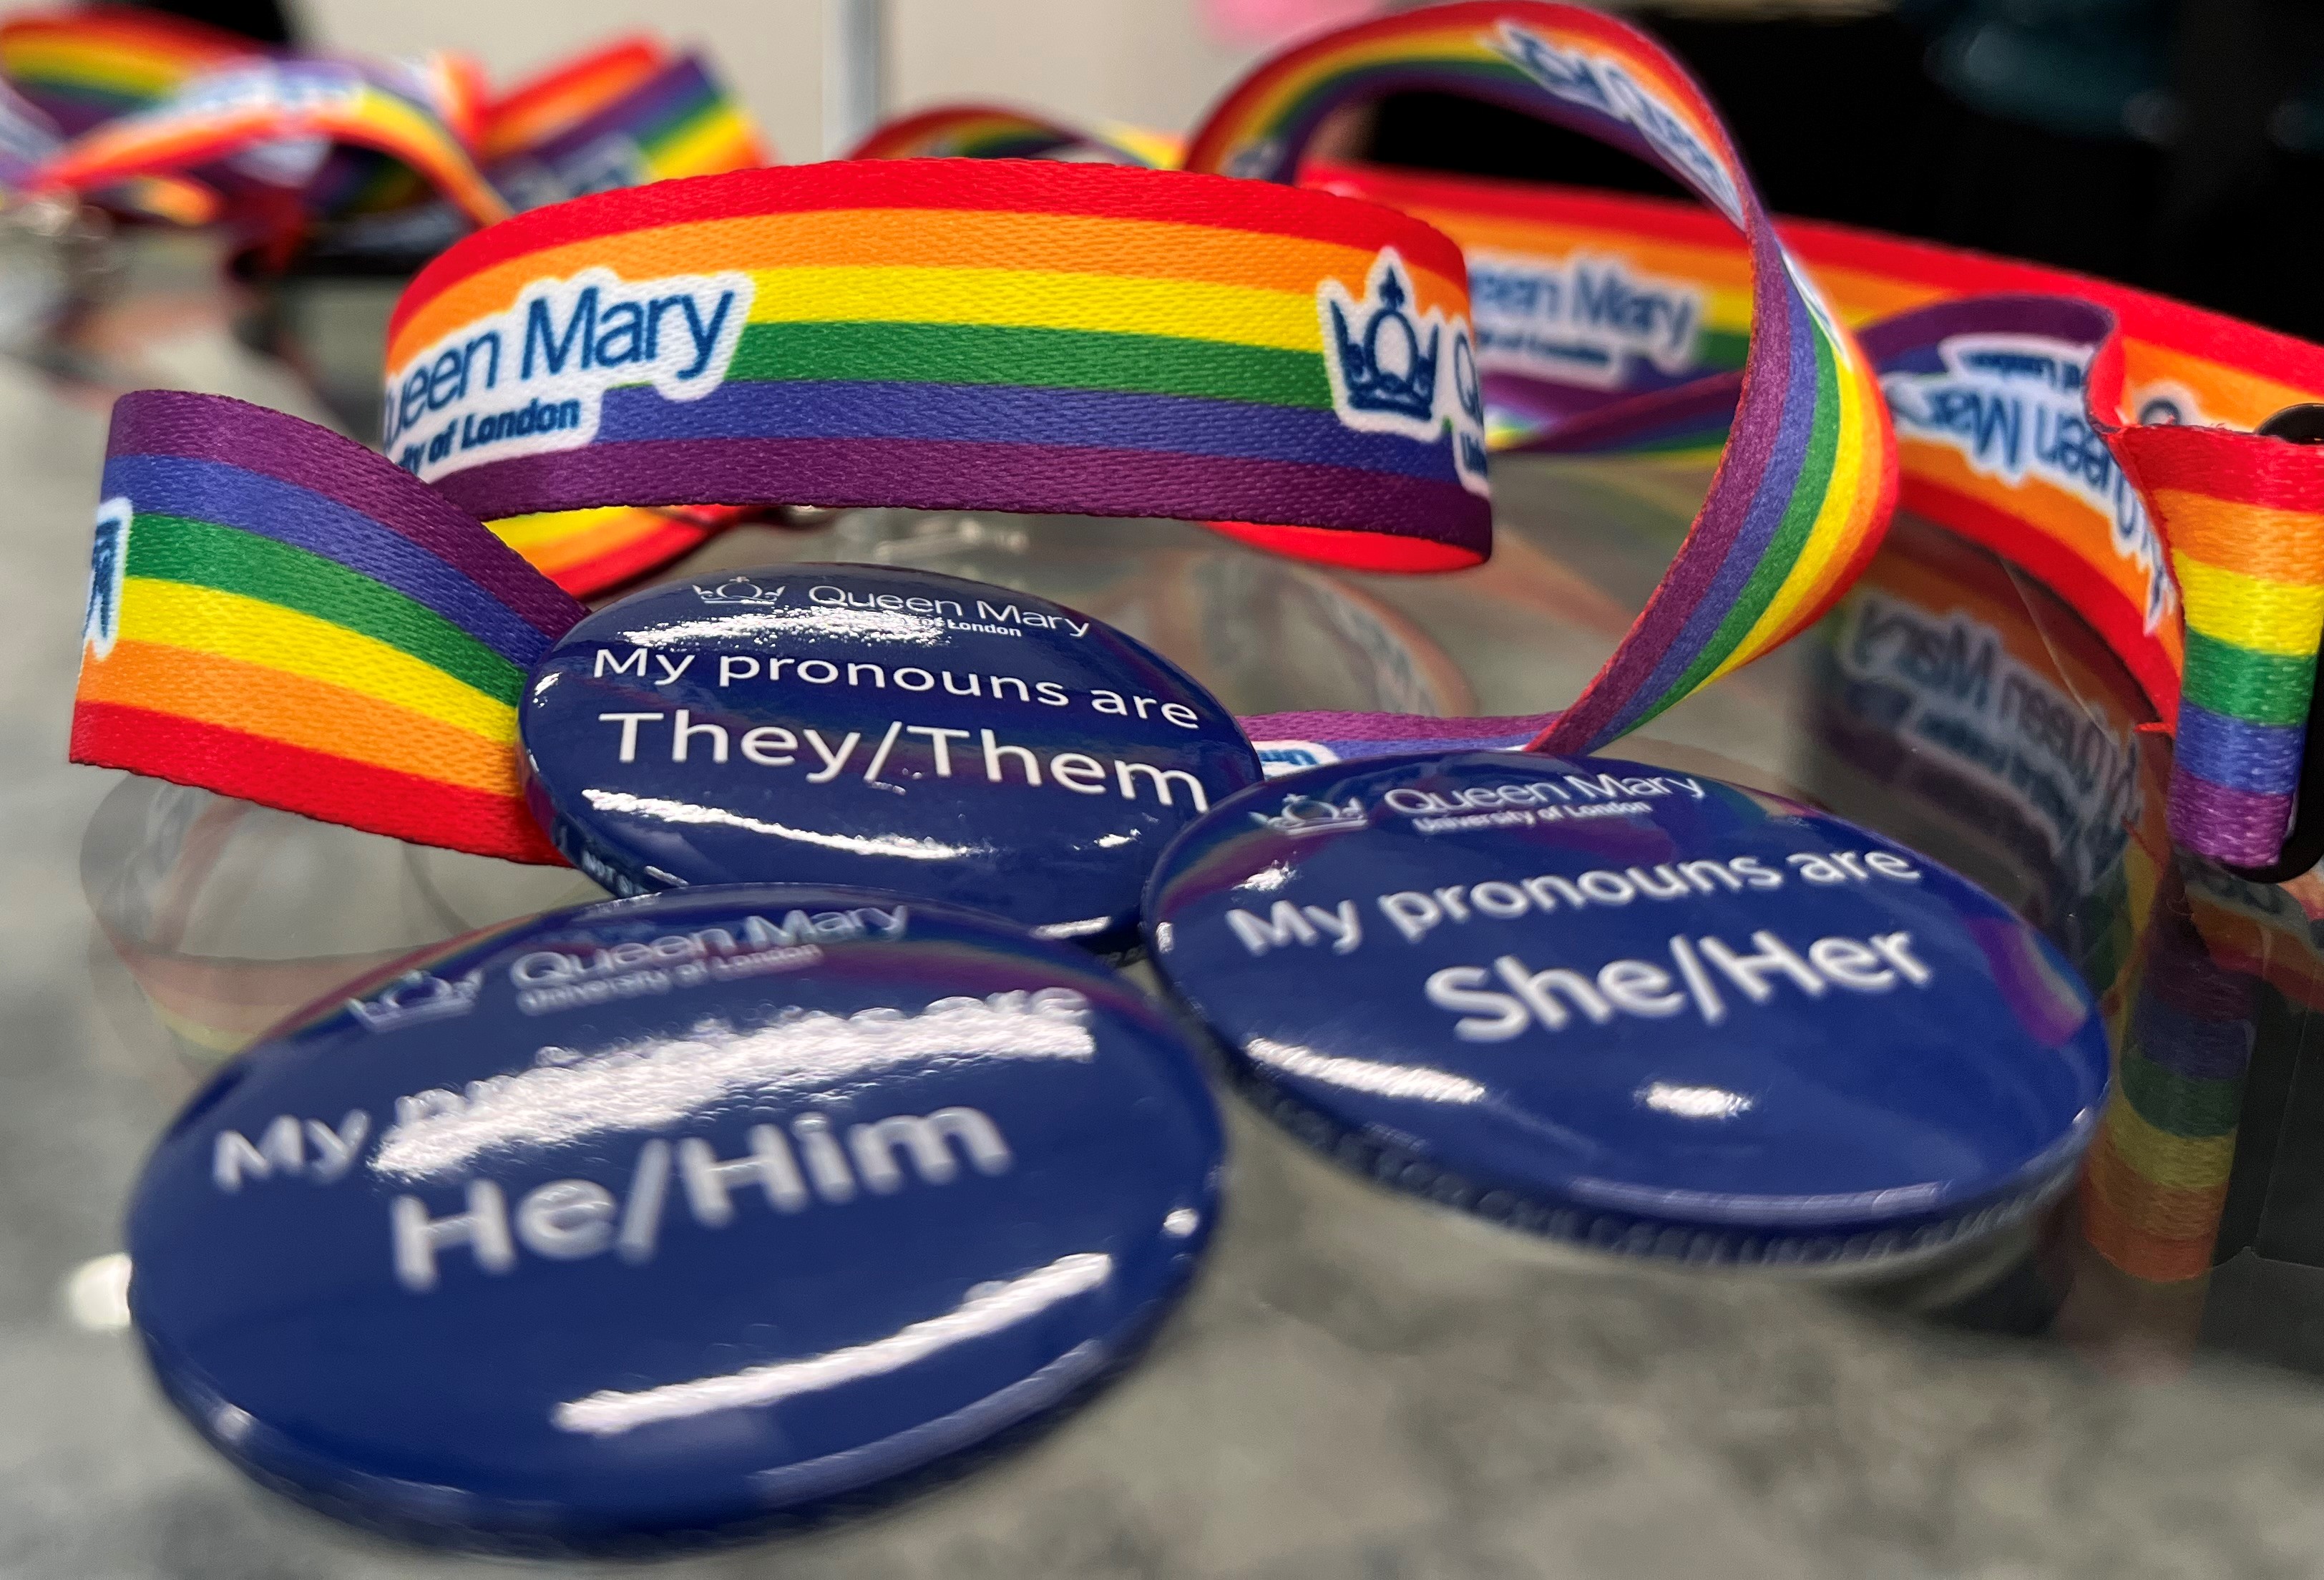 Photo of a selection of Queen Mary pronoun badges and rainbow lanyards